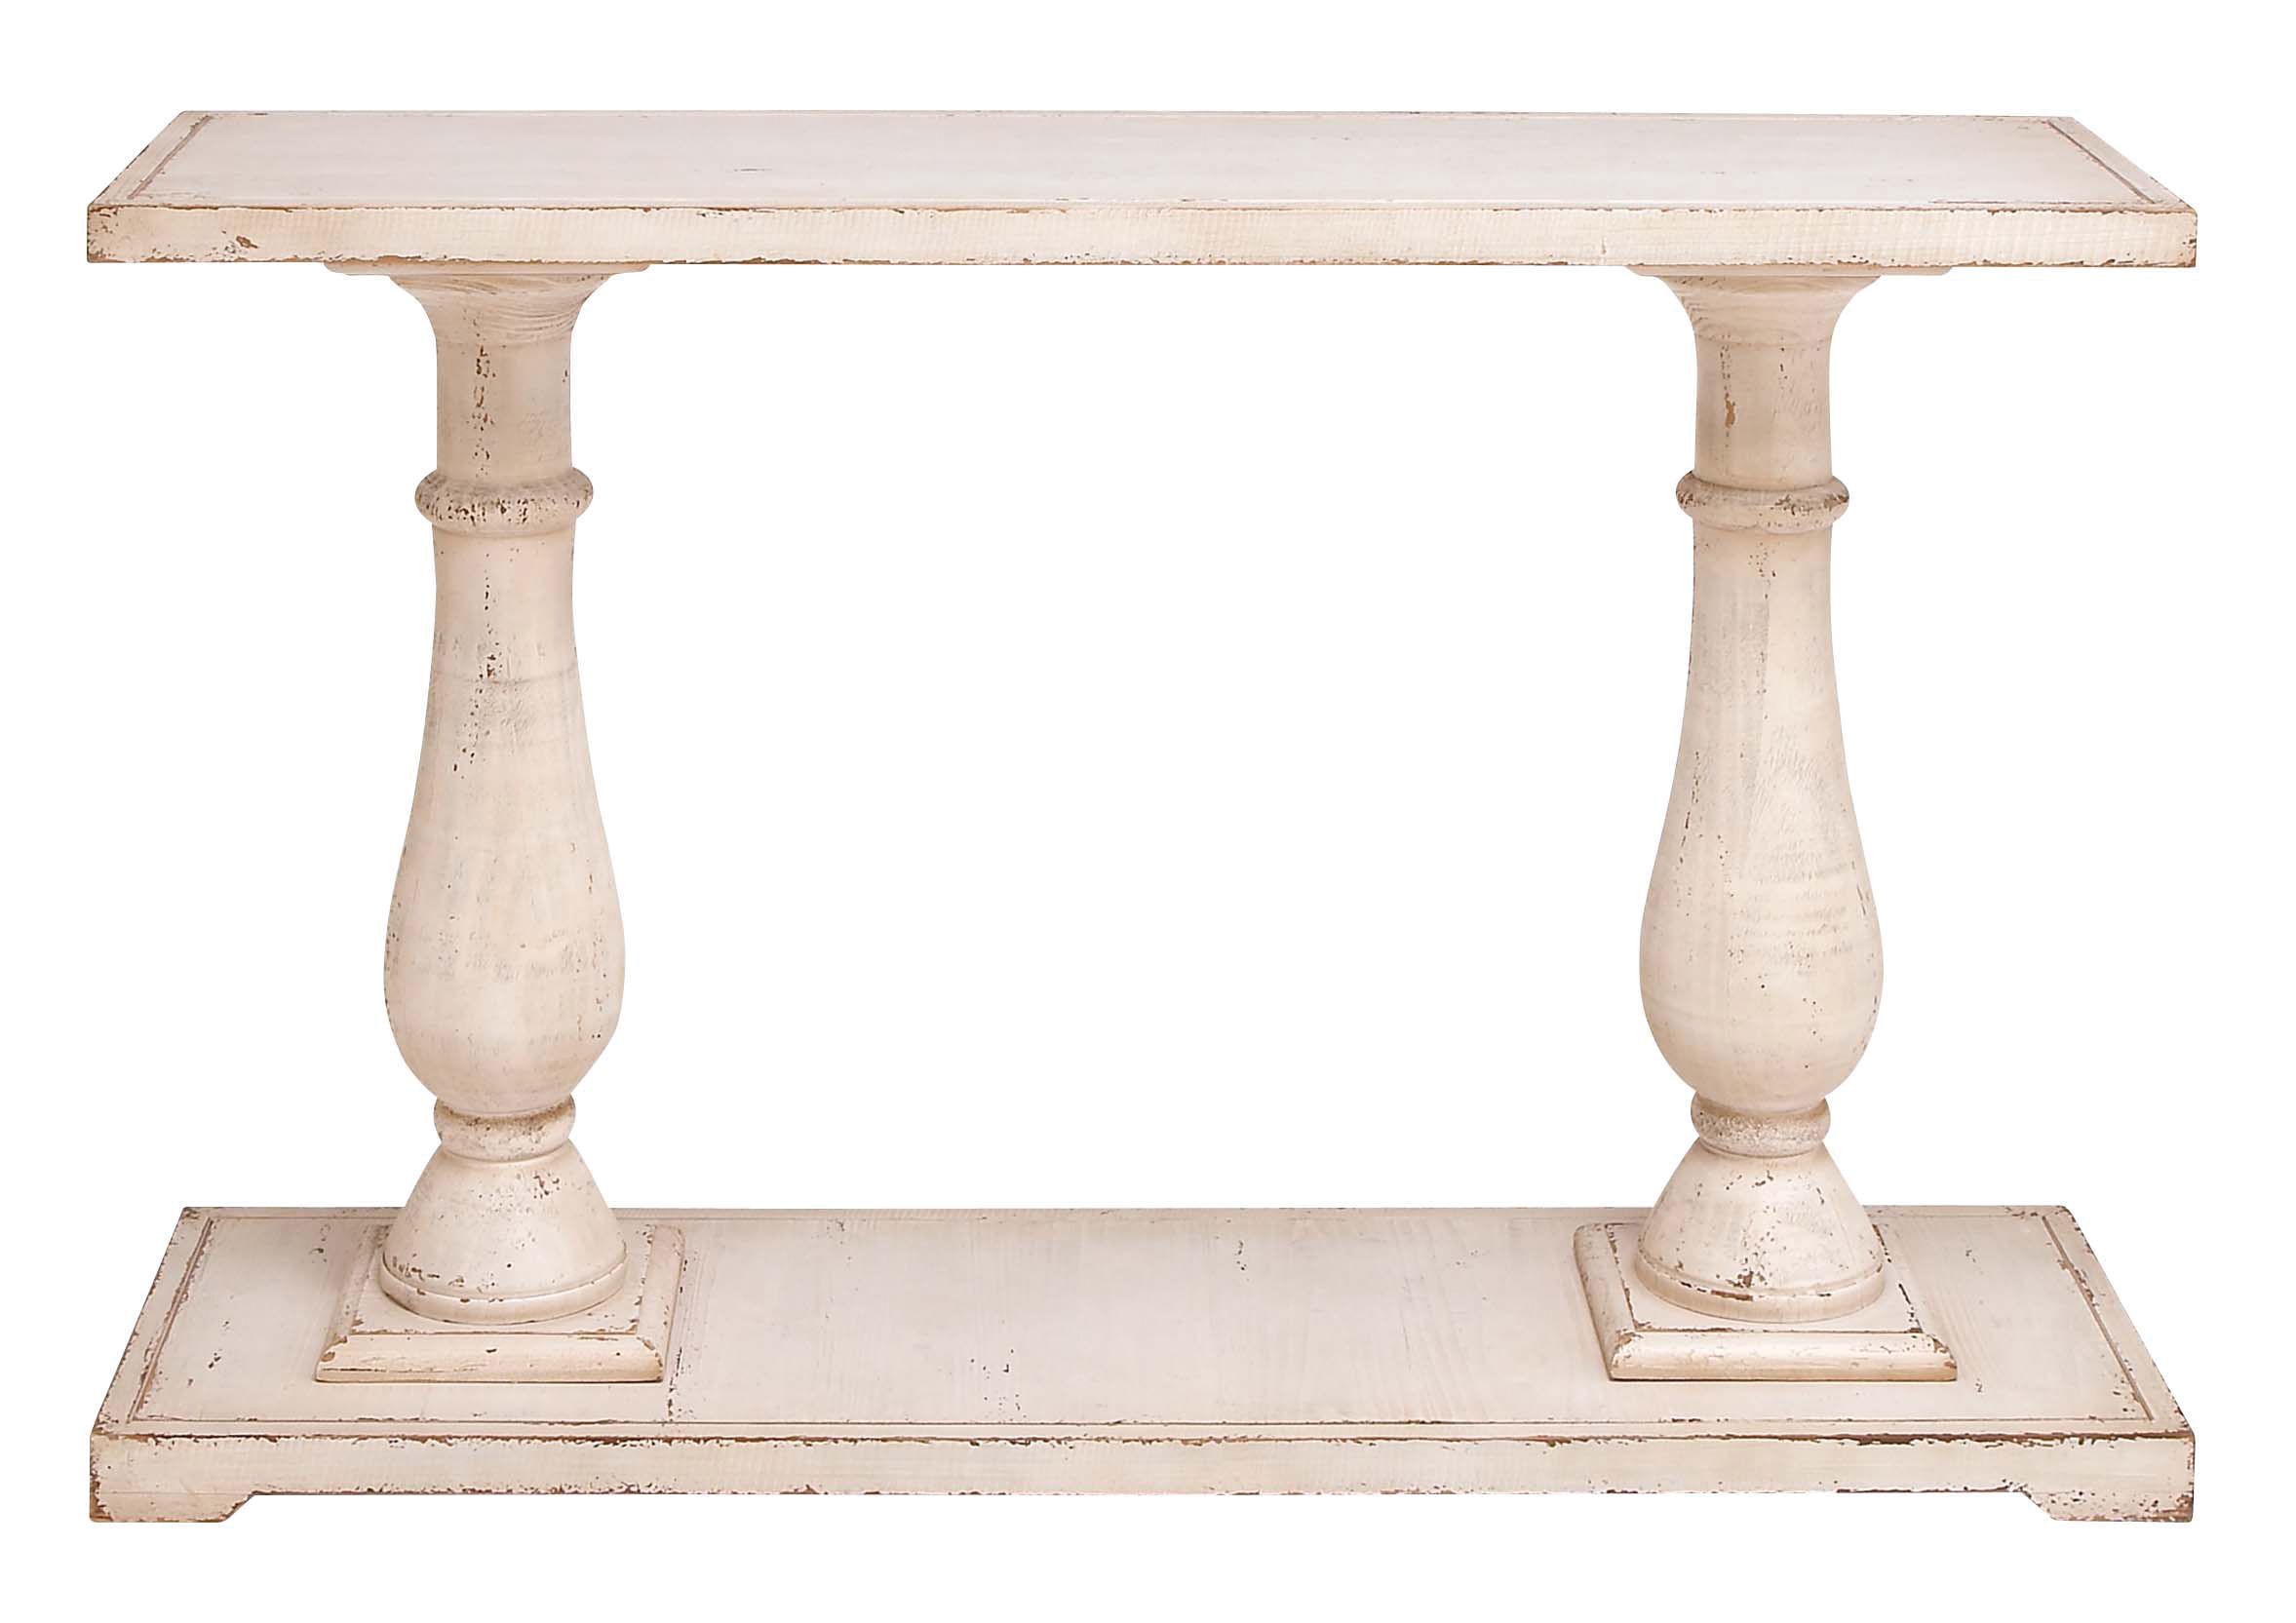 Decmode 48" X 32" Rectangular Antique White Wood Console Table W Pertaining To White Triangular Console Tables (View 14 of 20)